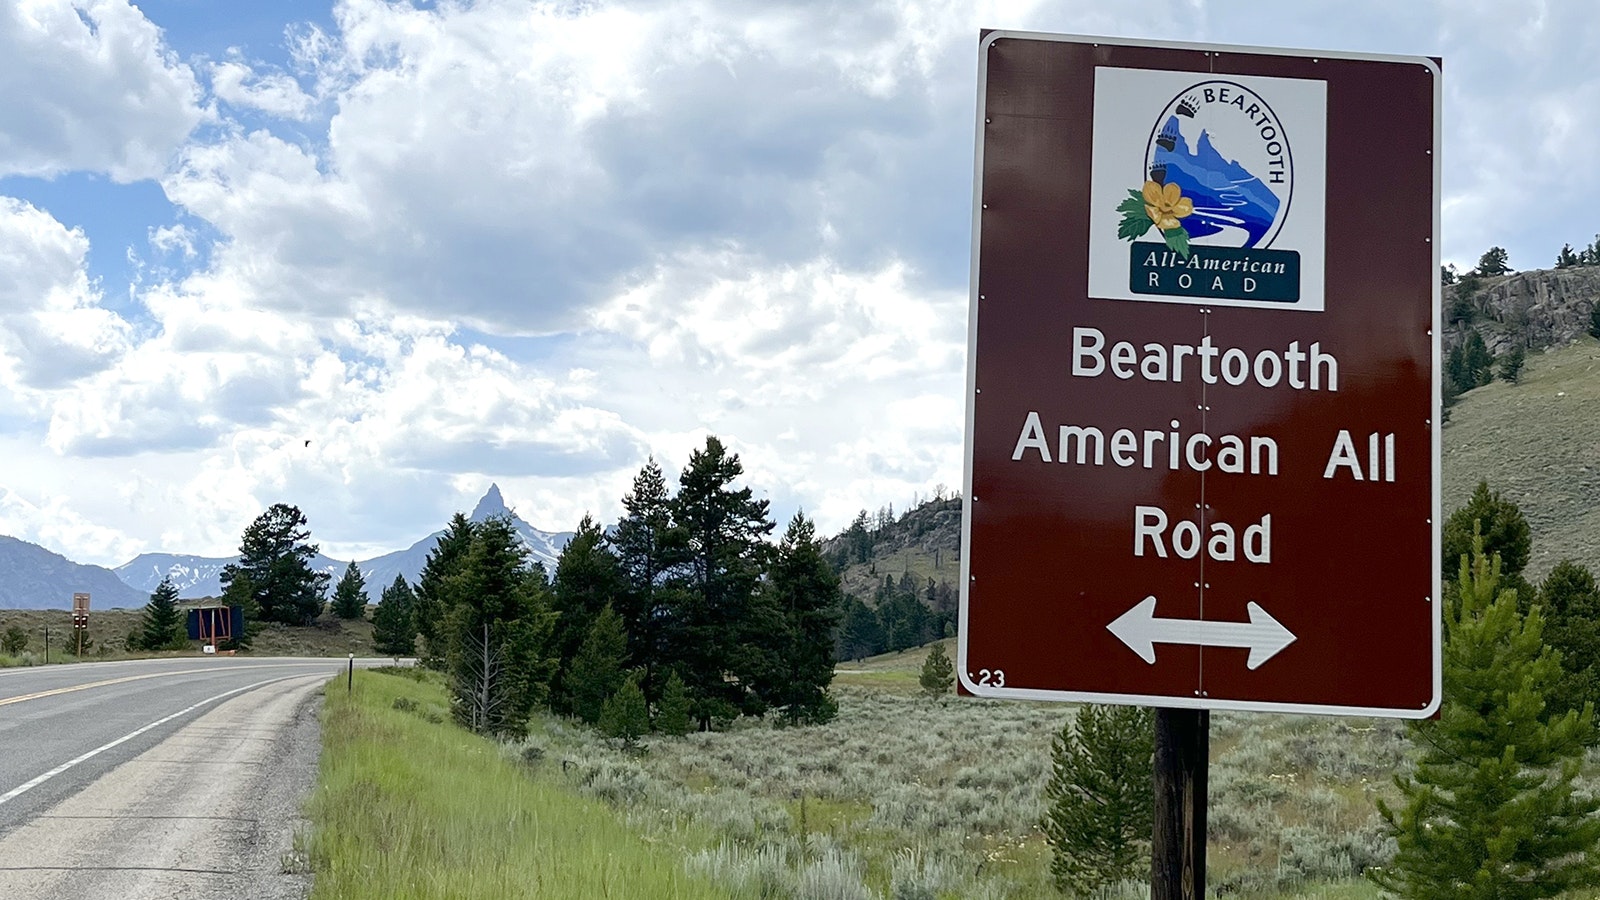 This sign that was along the Beartooth Highway in Wyoming had the words "All" and "American" mistakenly switched.